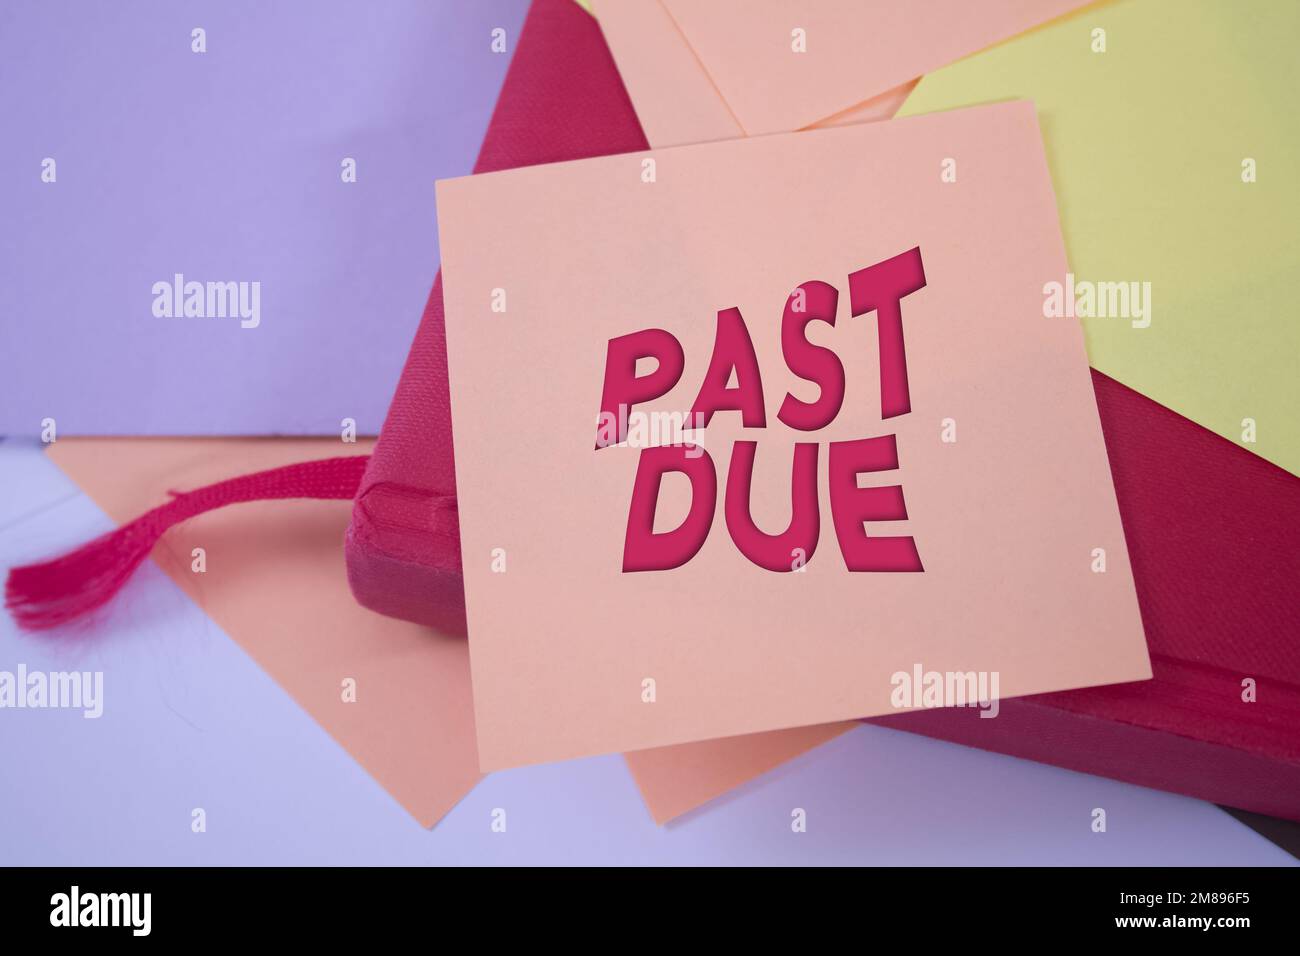 Past Due. Text on adhesive note paper. Event, celebration reminder message. Stock Photo